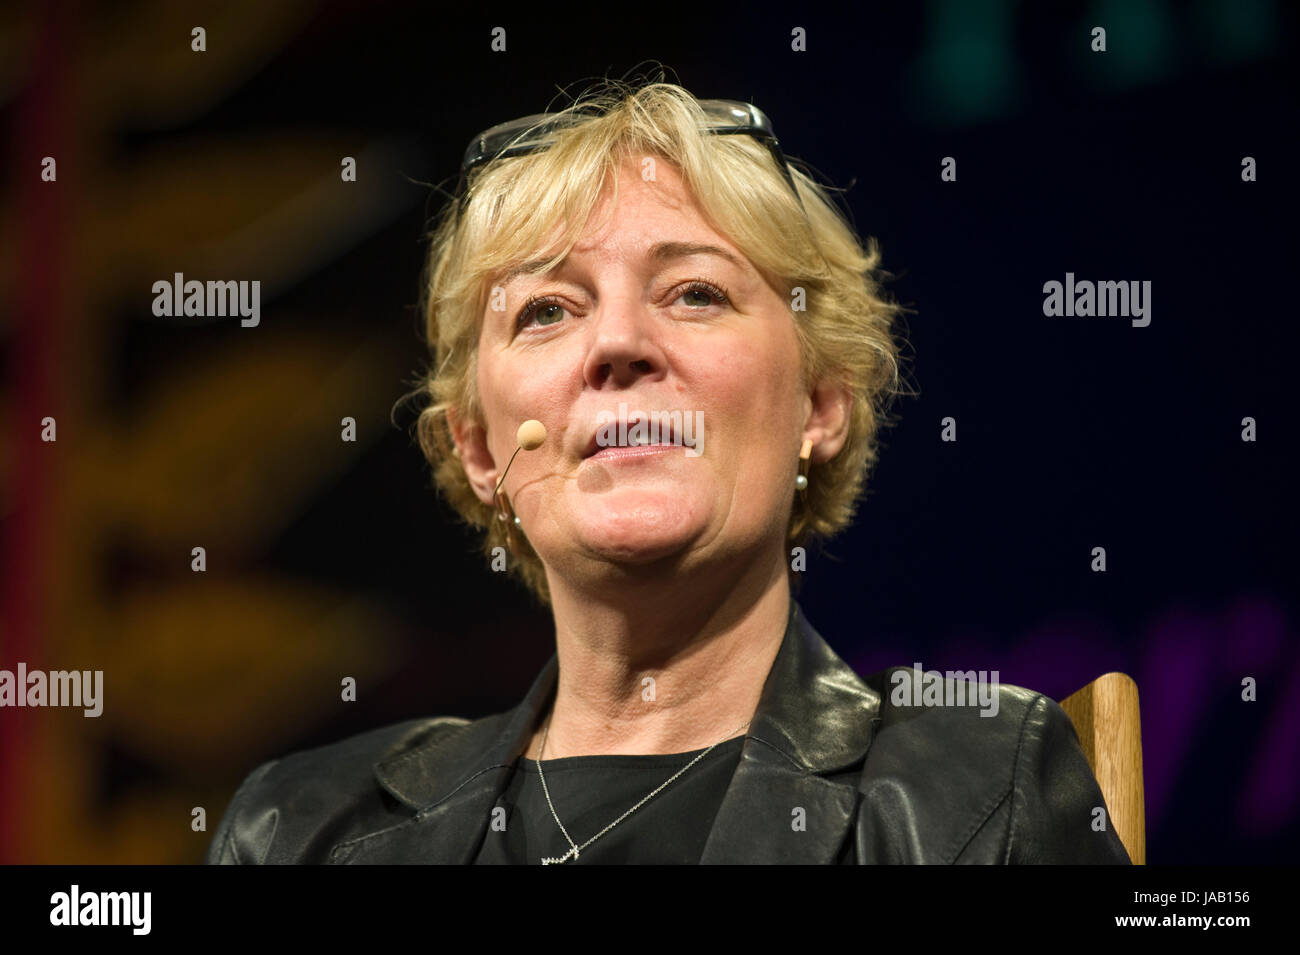 Jo Malone perfumer speaking about her life & career on stage at Hay Festival 2017 Hay-on-Wye Powys Wales UK Stock Photo